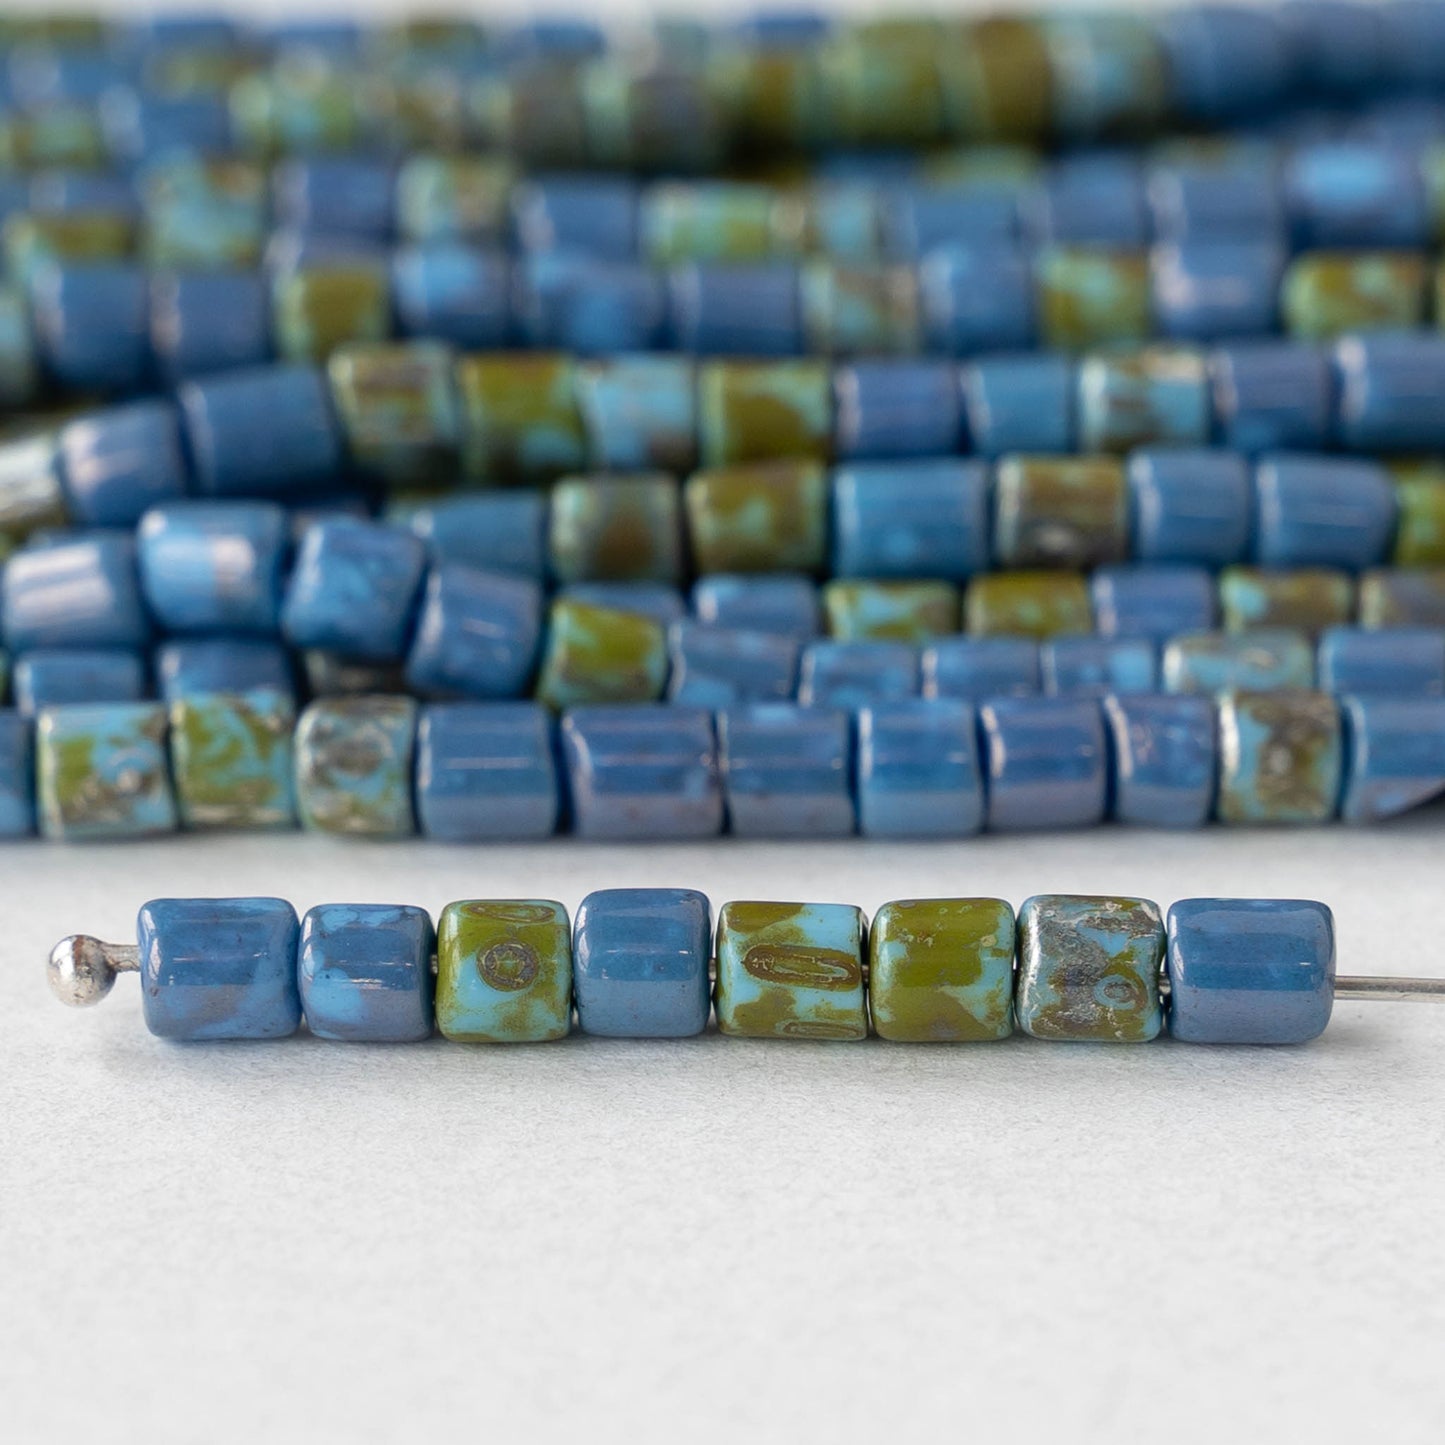 4x4mm Picasso Tube Beads - Blue Green Picasso Mix  - 20 inches